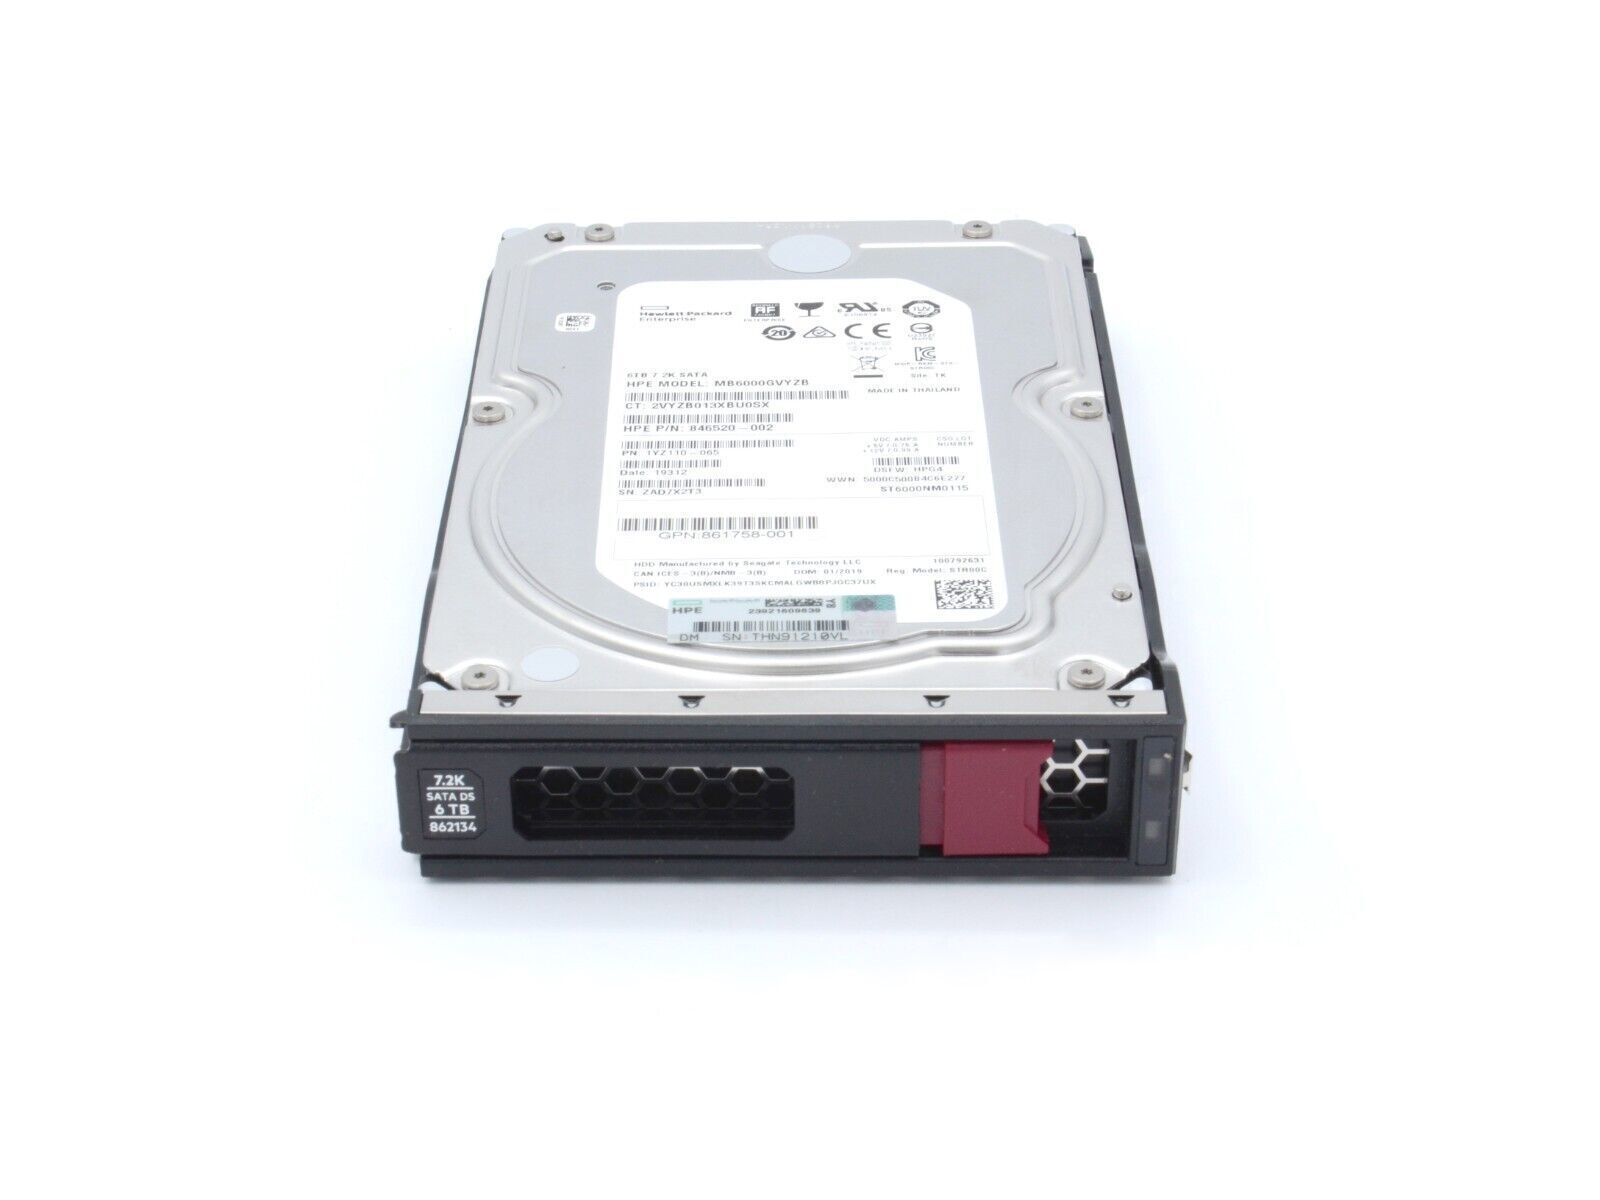 HPE 862134-001 6TB SATA 6G 3.5 Hard Drive HDD 7.2K LP LFF 6Gb/s SC 512e DS 256MB